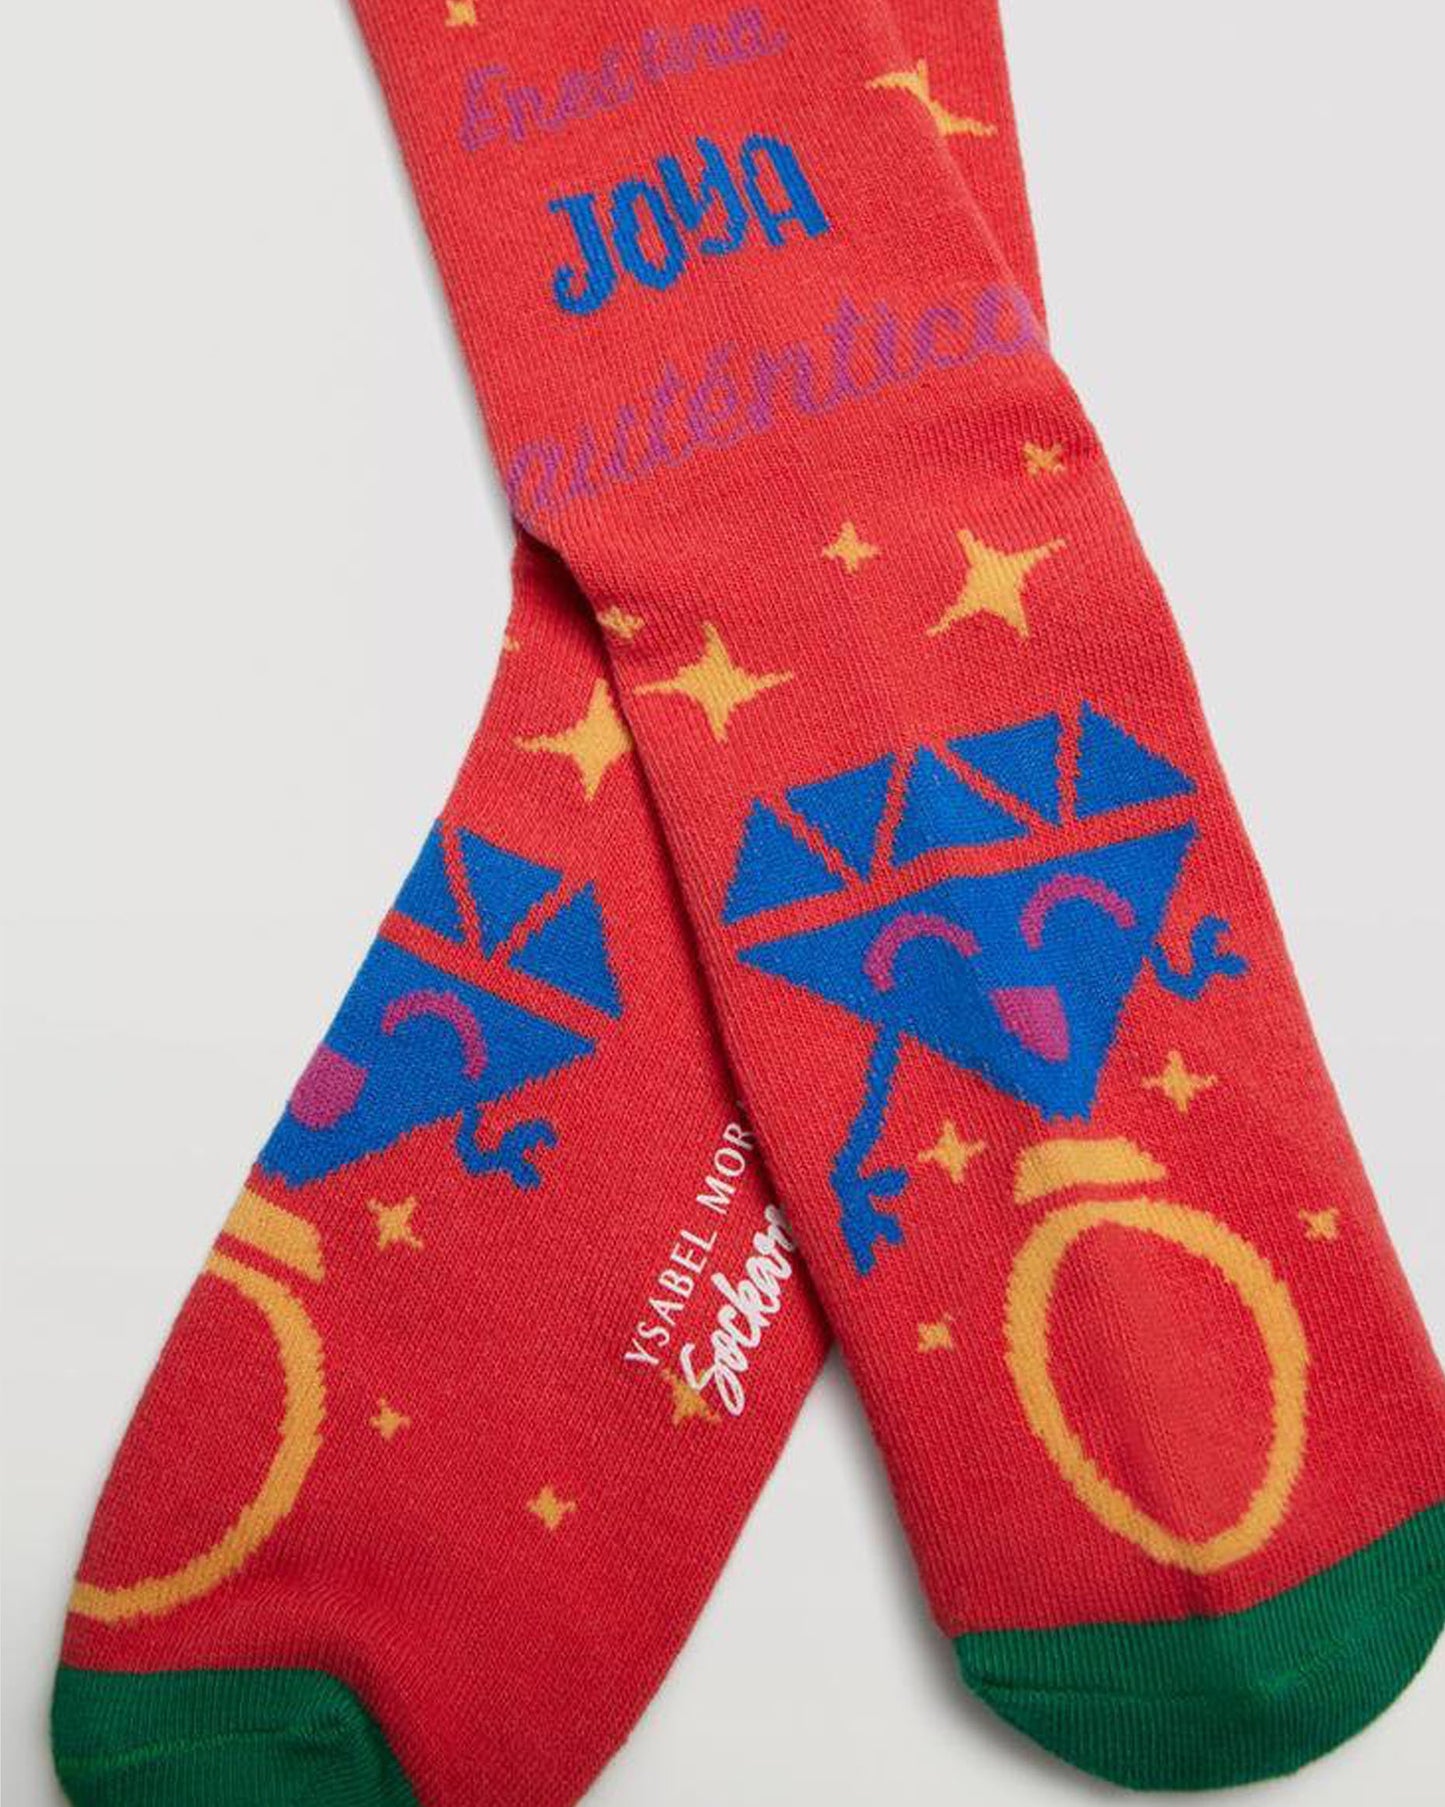 Ysabel Mora Sockarrats - Bright red cotton crew length socks with a multicoloured diamond ring pattern around the cuff, smiling diamond ring motif on the foot and stars, green cuff, toe and heel. 